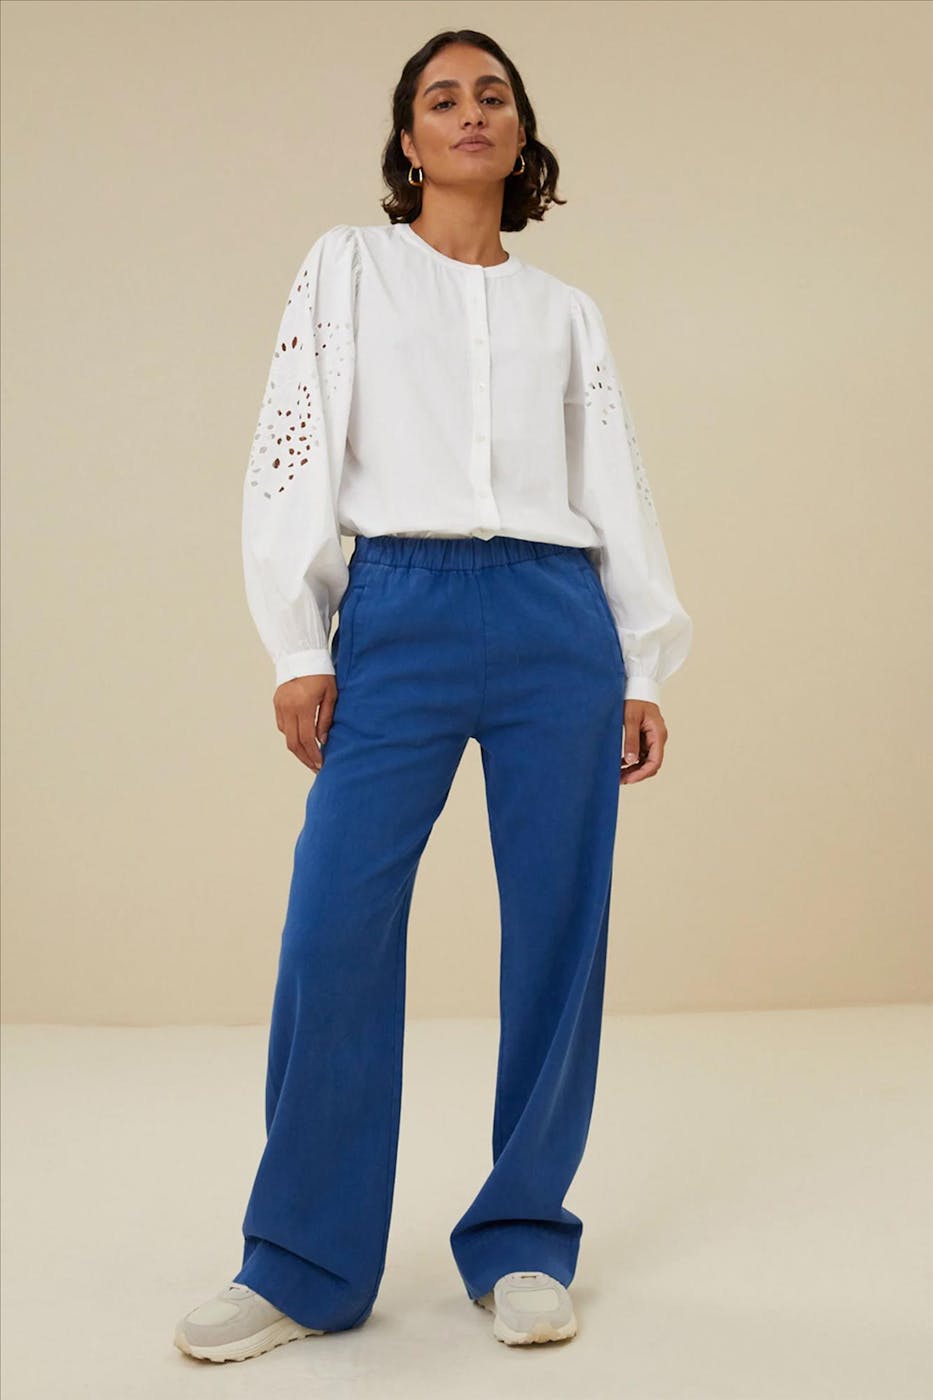 BY BAR - Witte Rikki Embroidery blouse